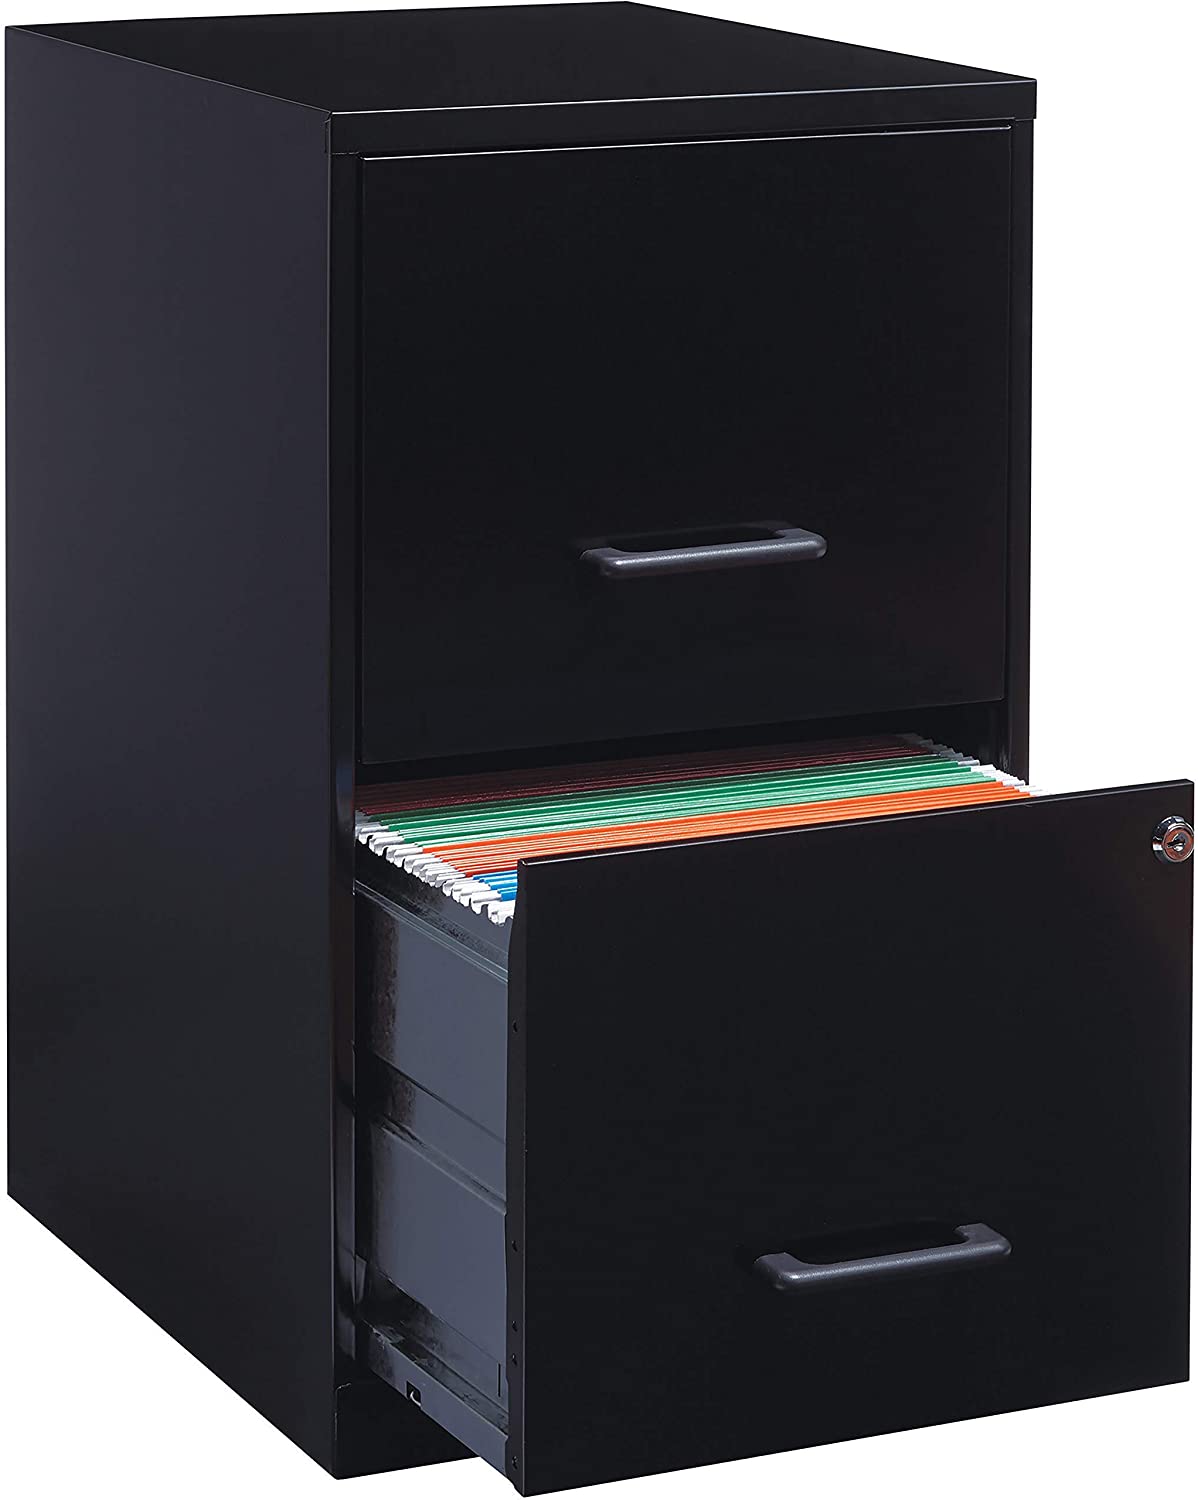 Henlus 2 Drawer Flie Cabinet with Lock Fully Assembled Metal Filing Cabinets for Home Office Black, 2 Drawer 